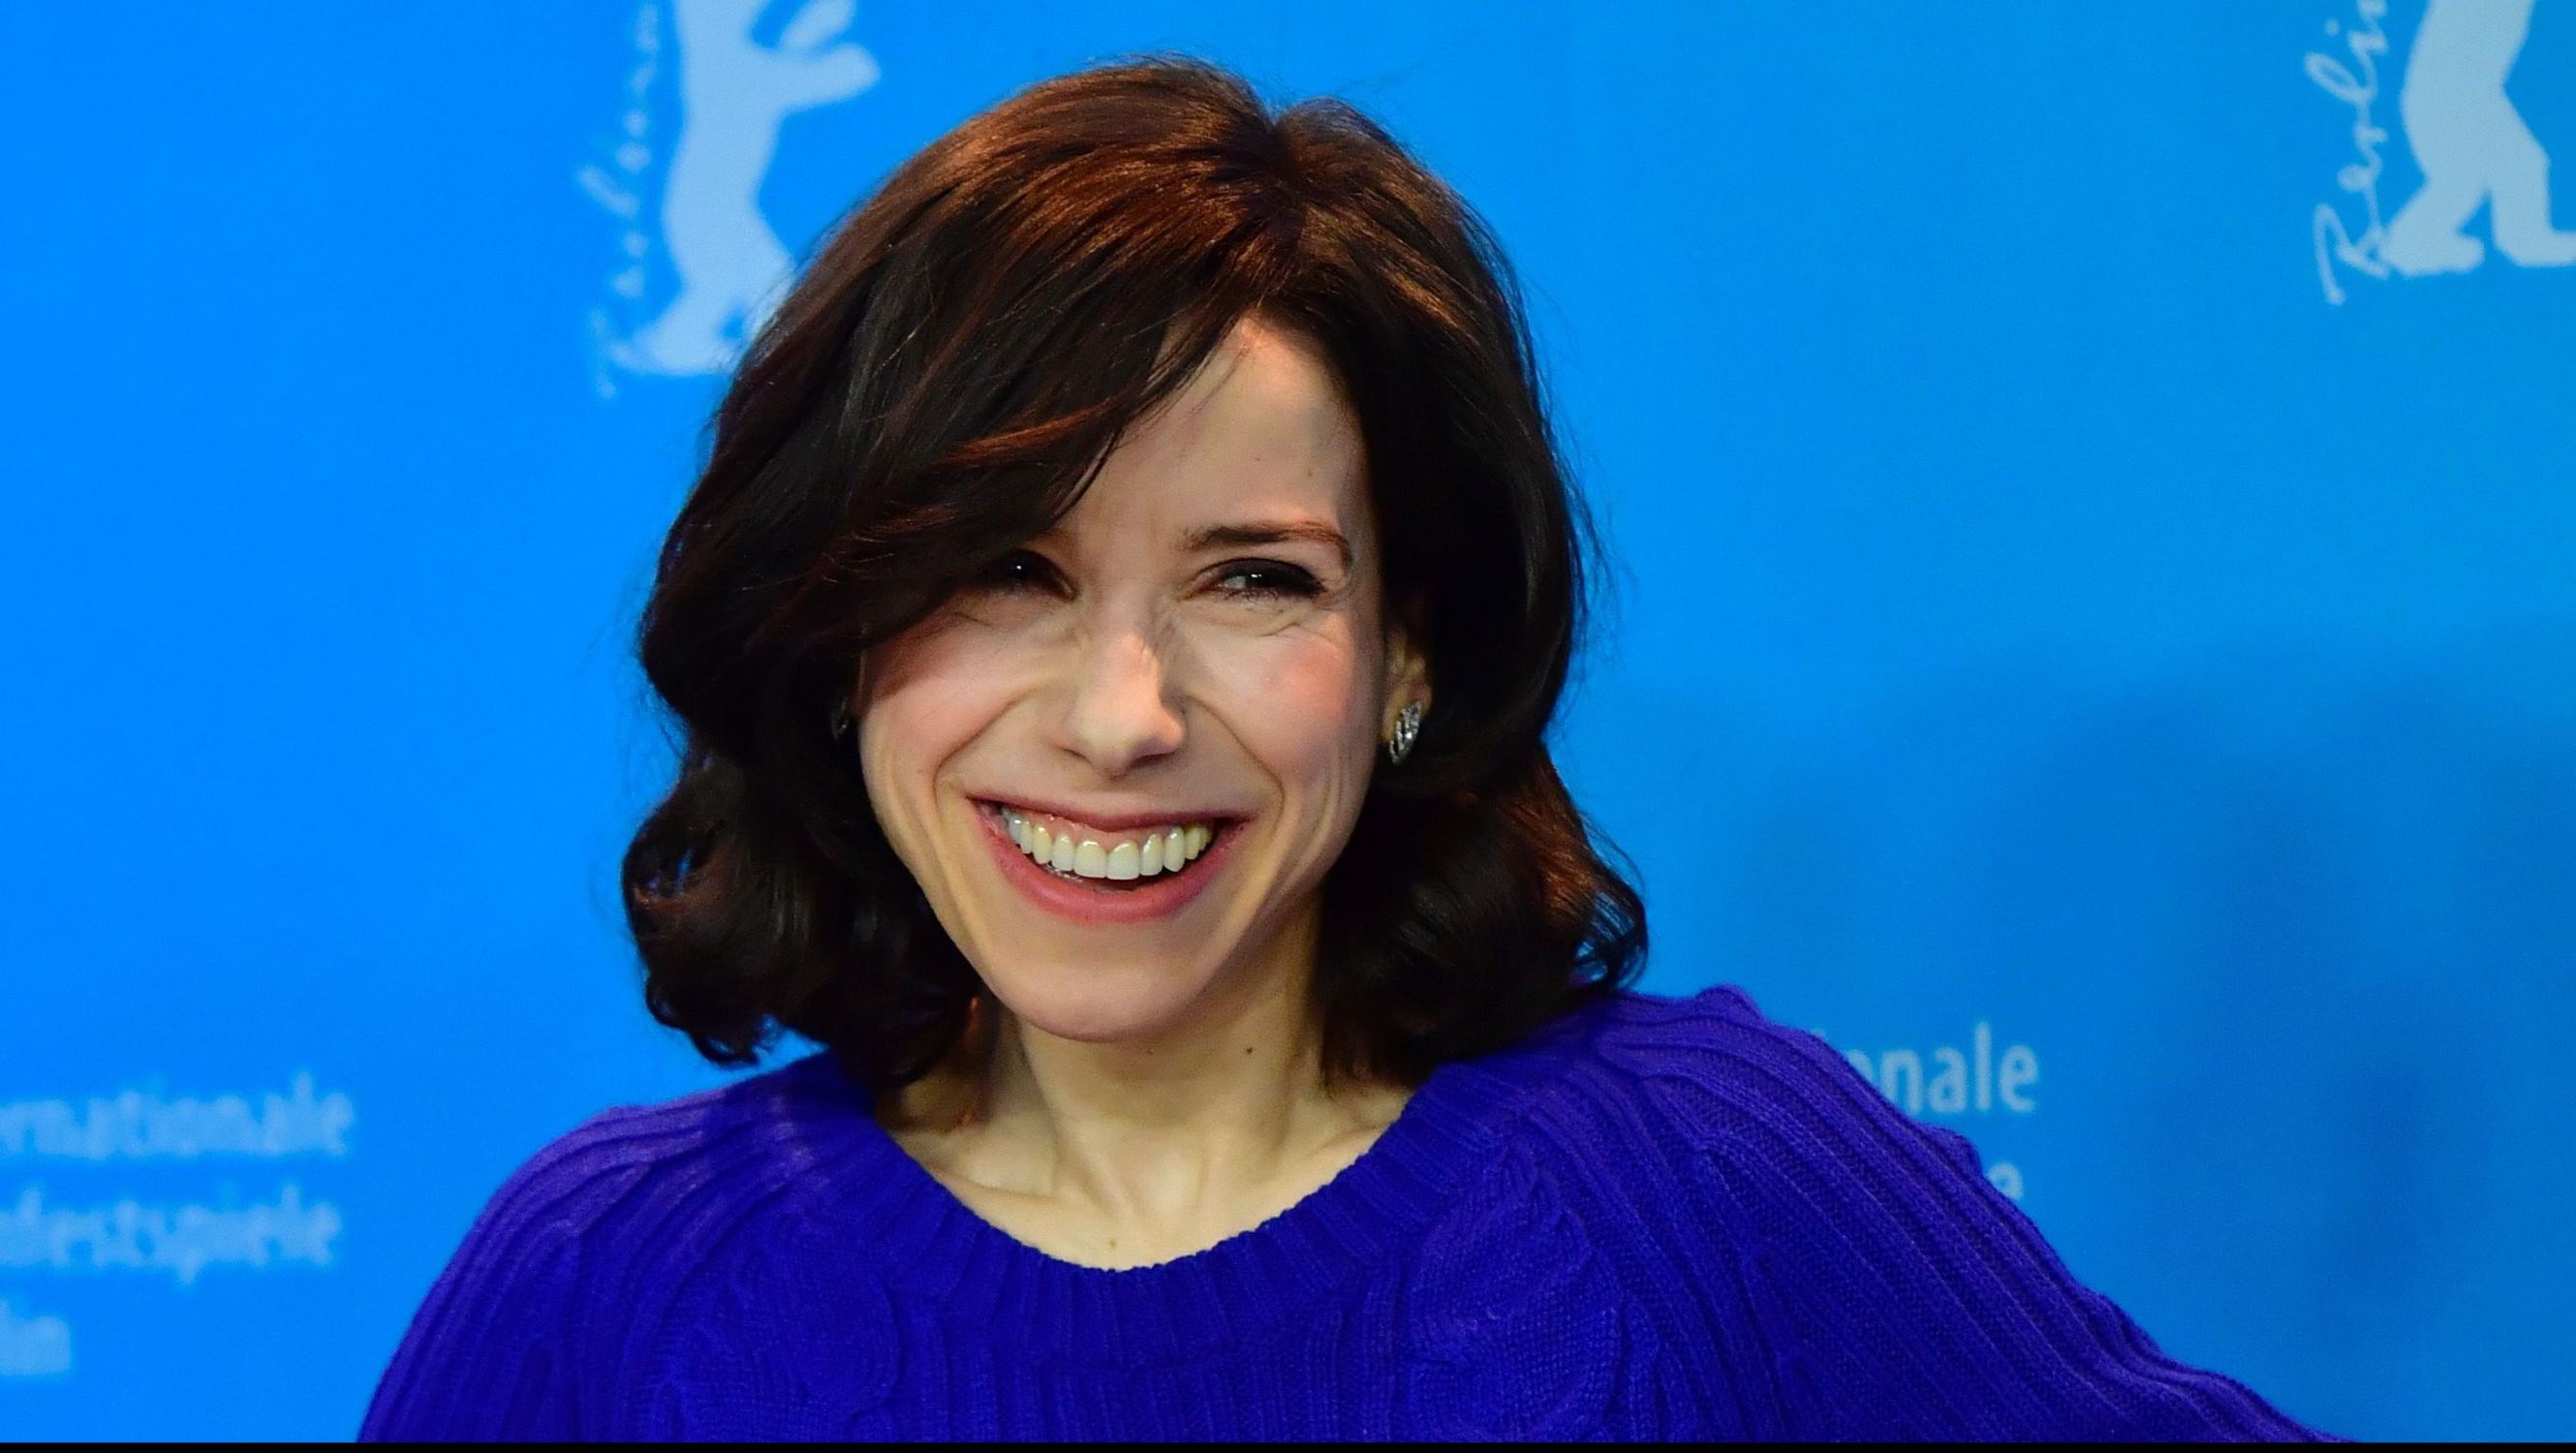 21-captivating-facts-about-sally-hawkins